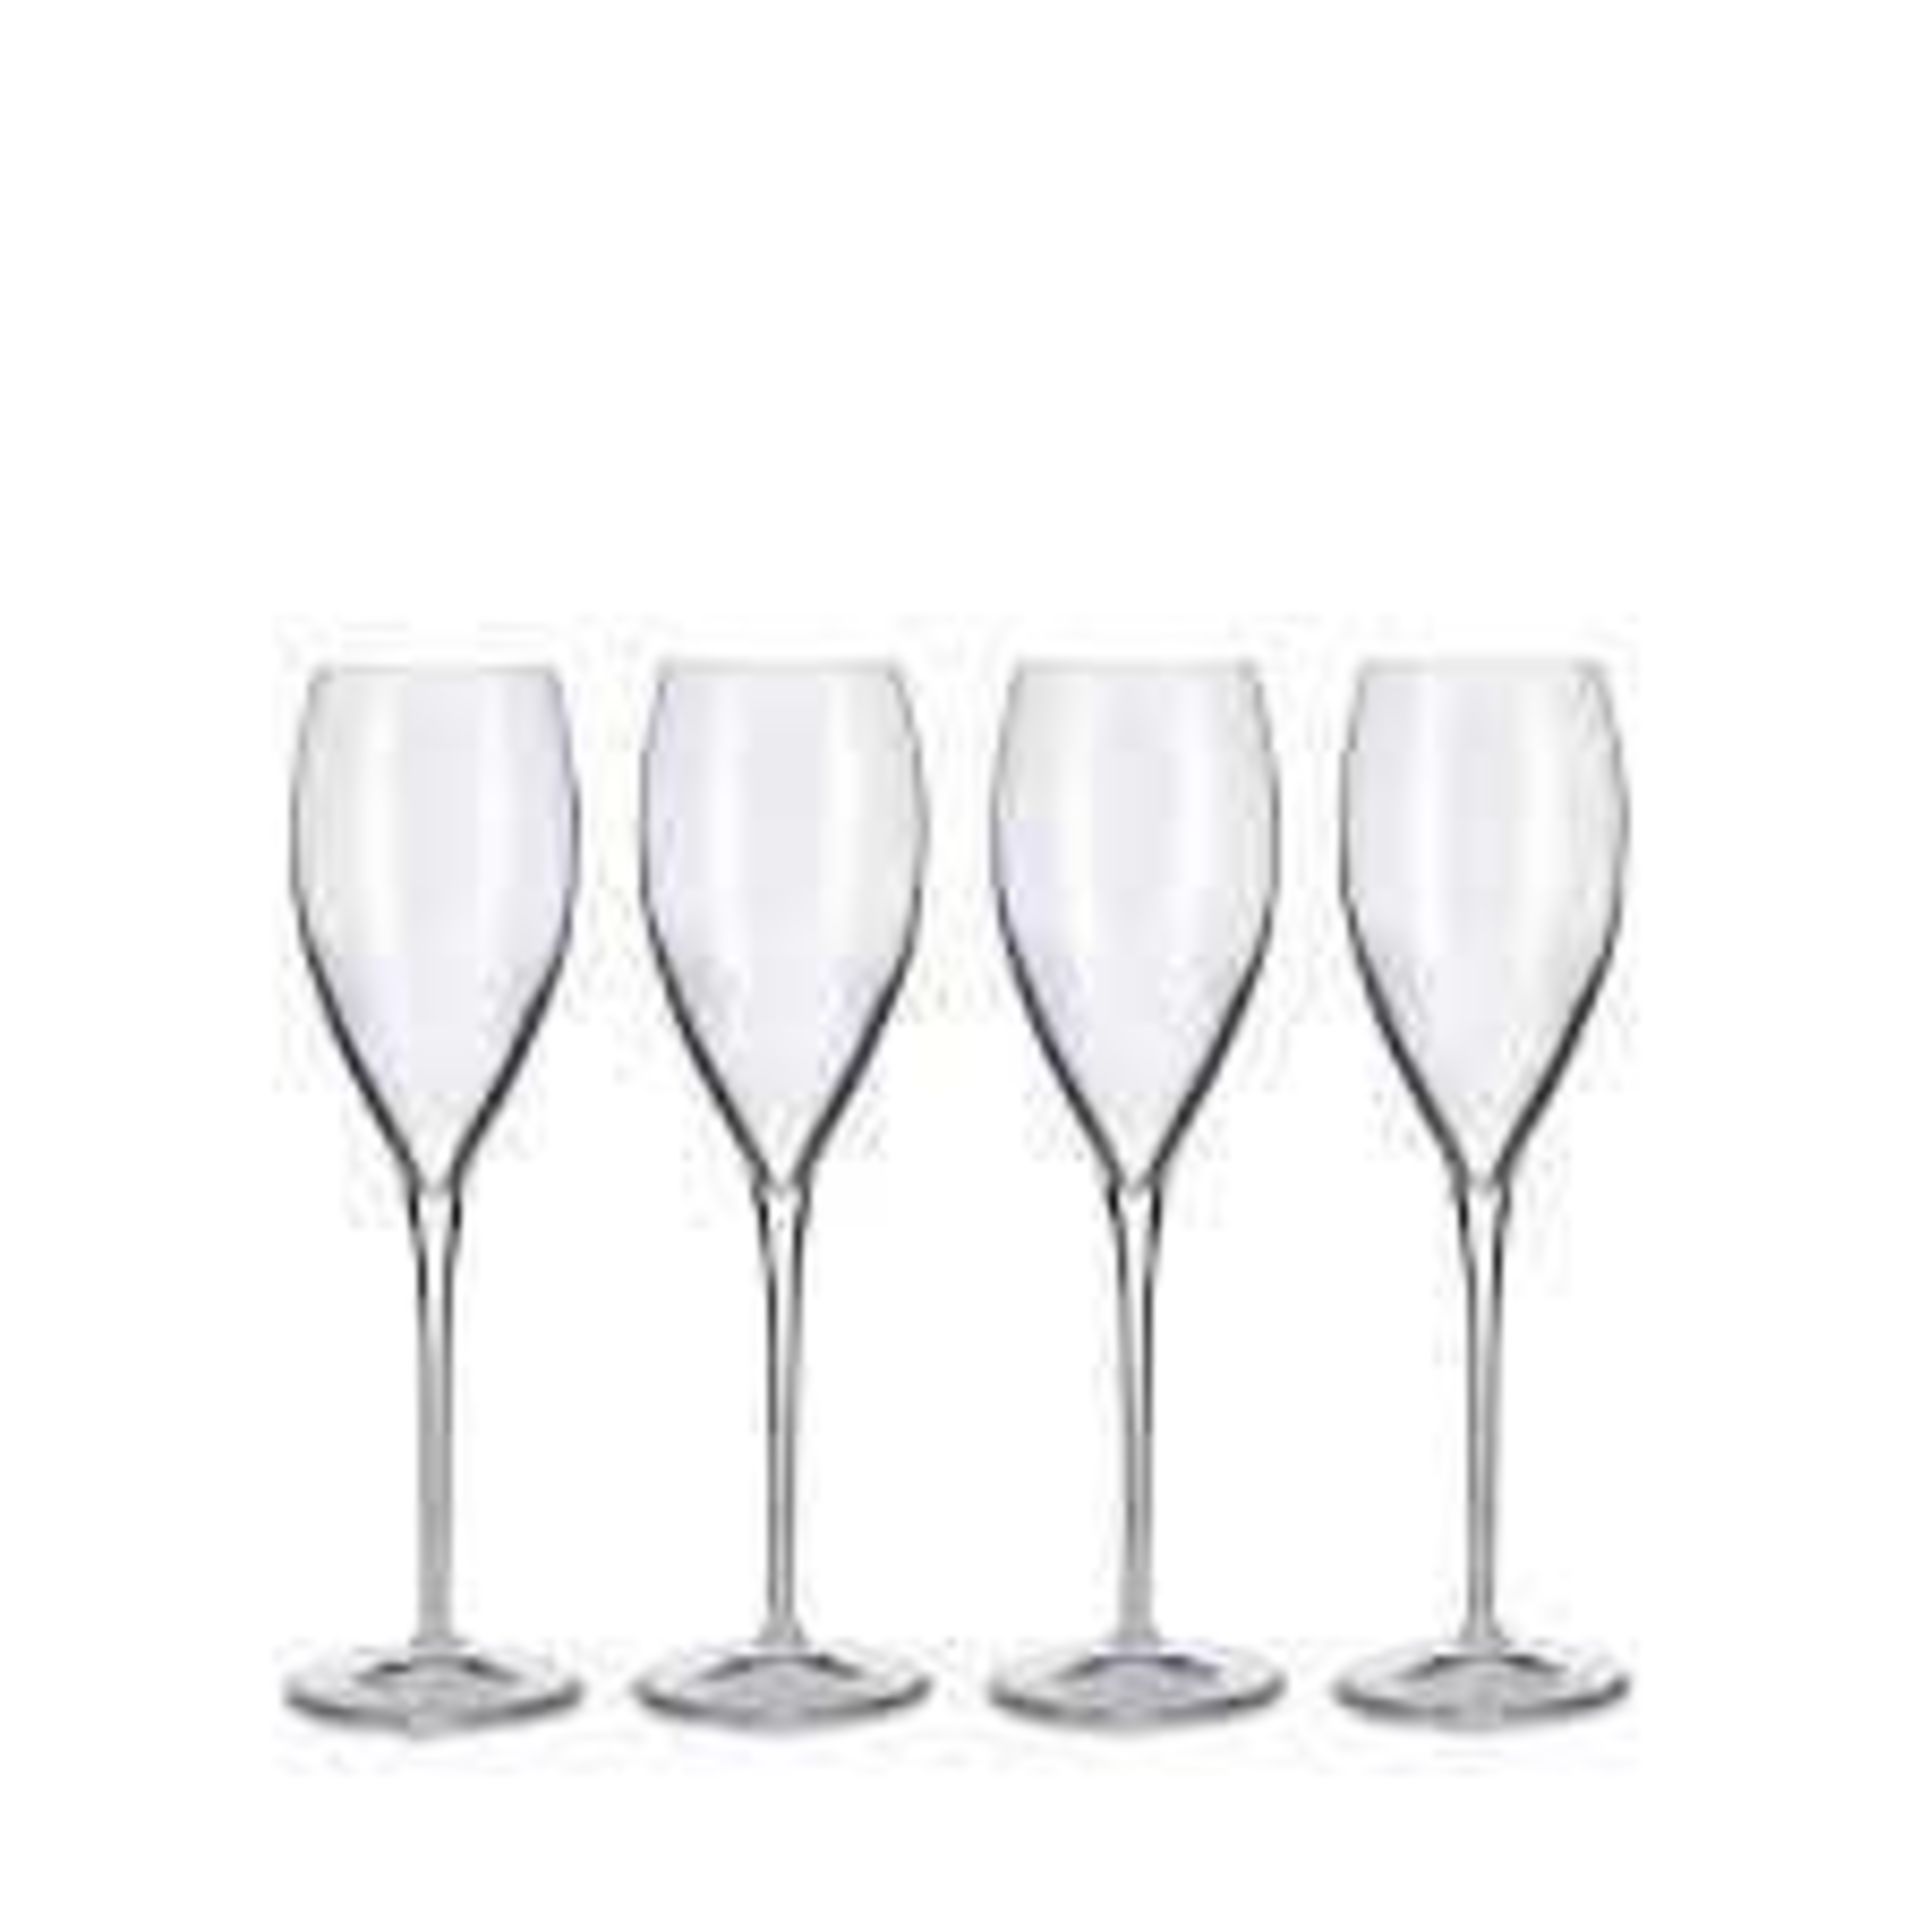 RRP £120 Lot To Contain 4 Boxed Jasper Conran Set Of 4 Davenport Crystal Glass Champagne Flutes